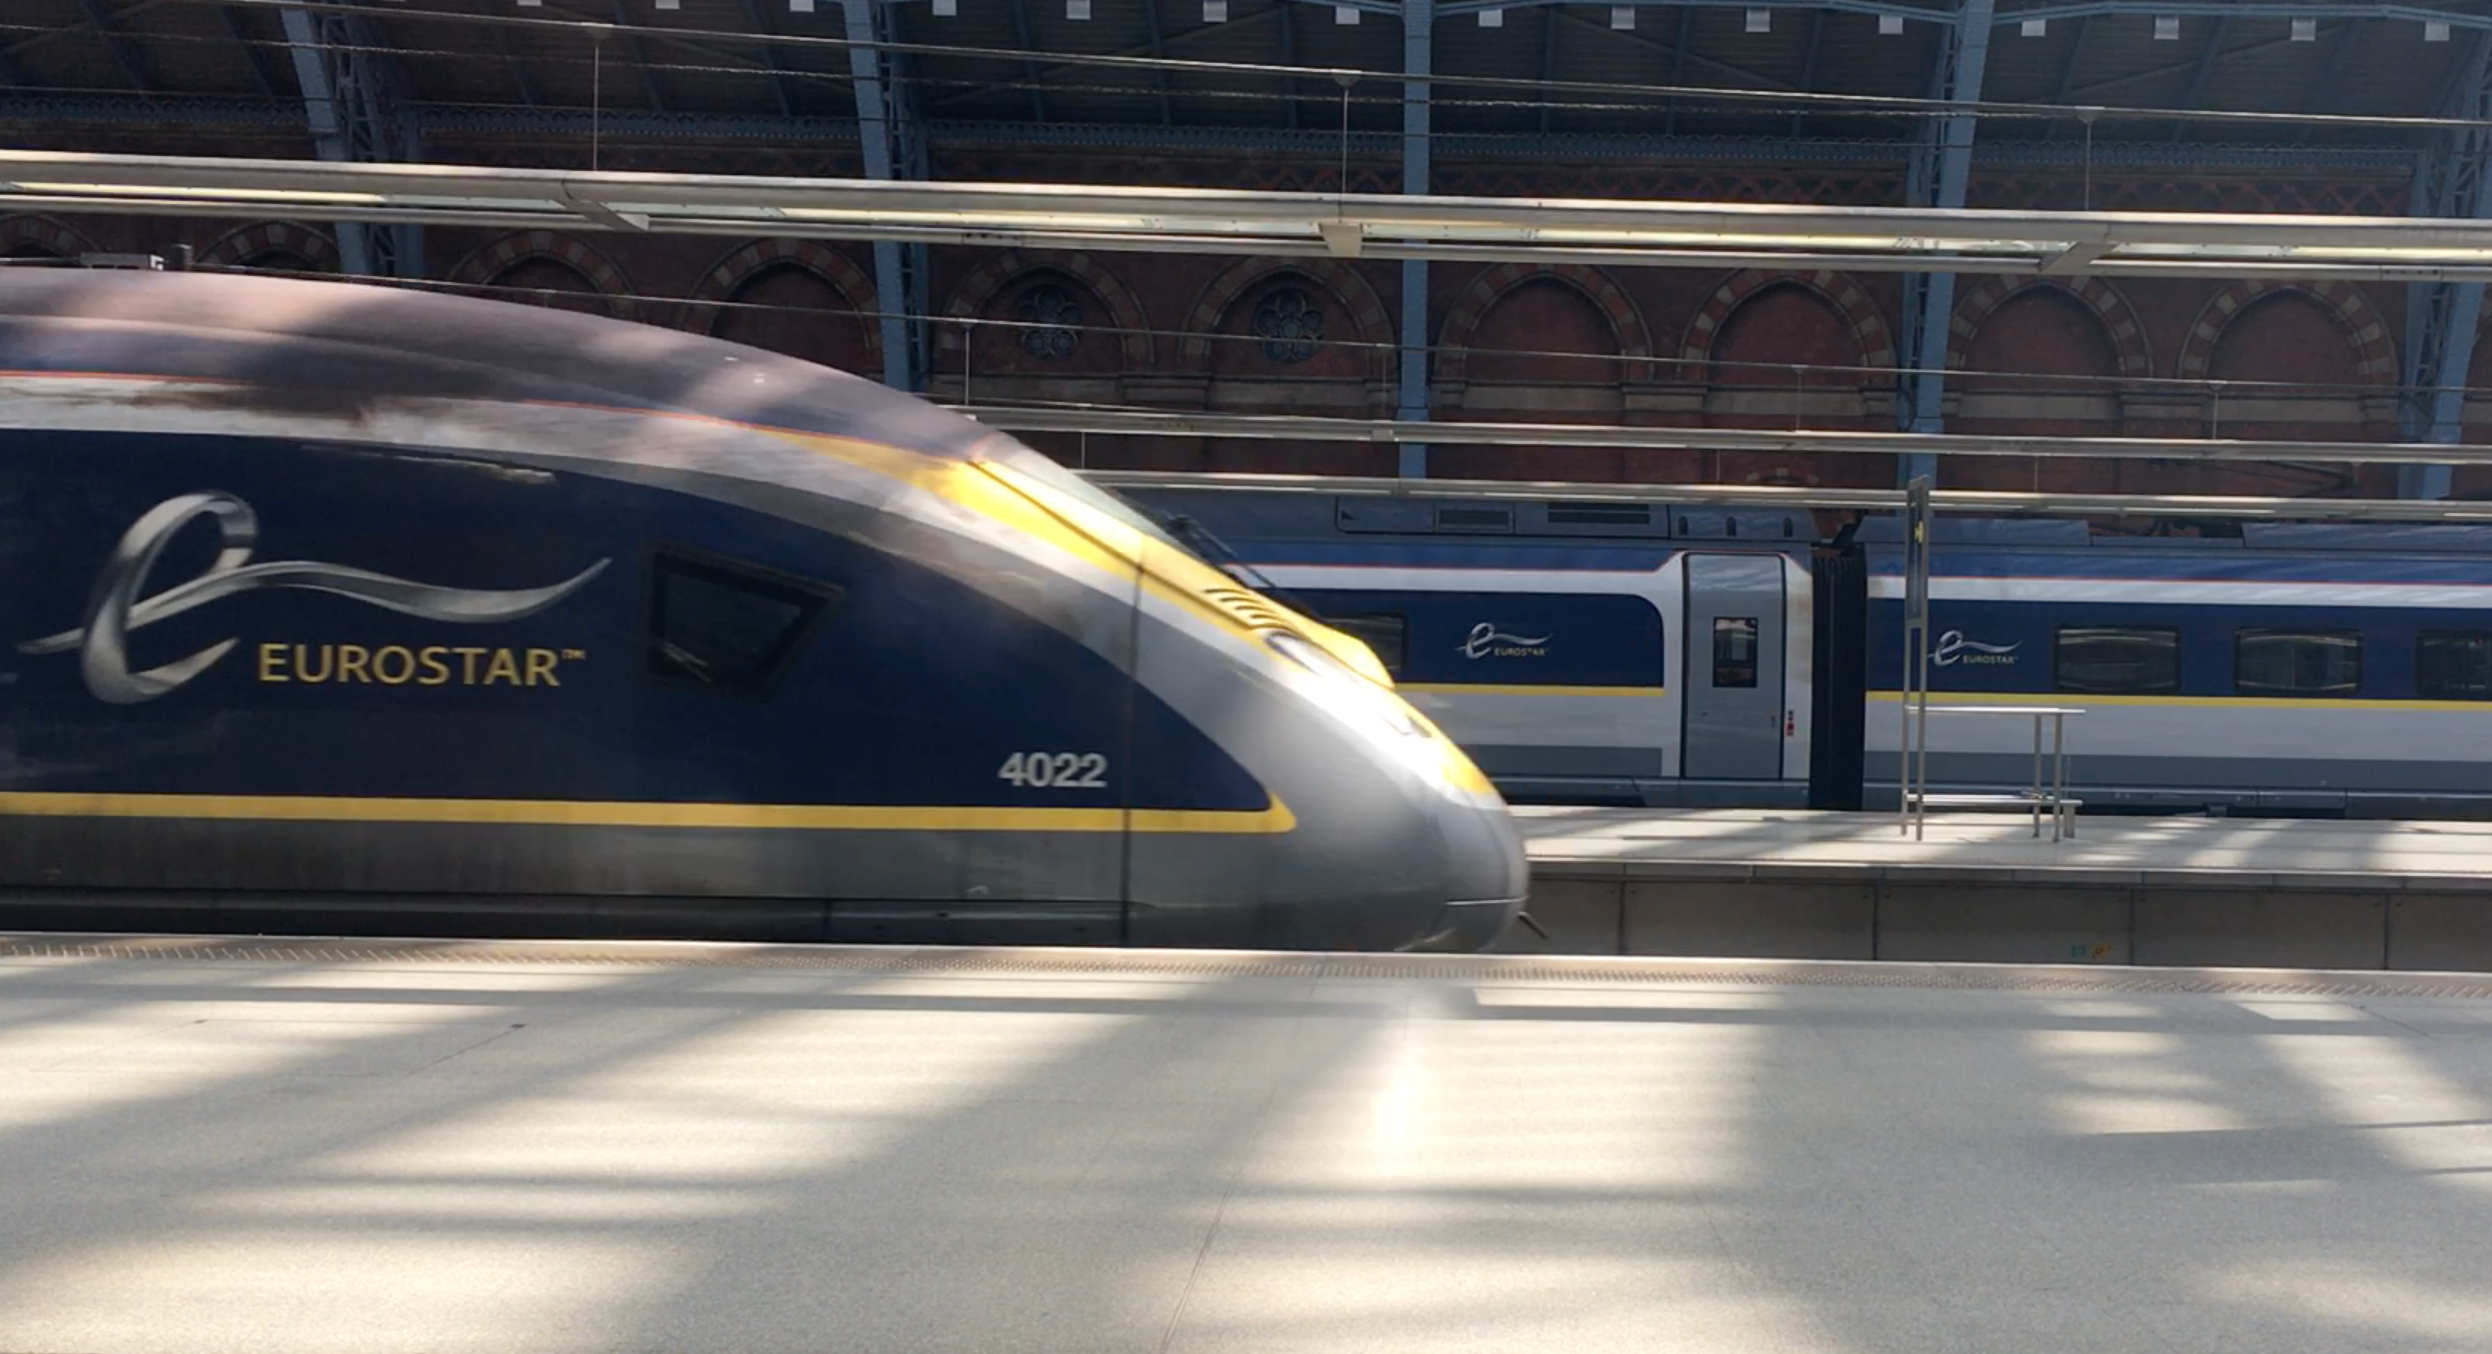 With Eurostar strikes and wider rail disruption, should travellers cut their losses?